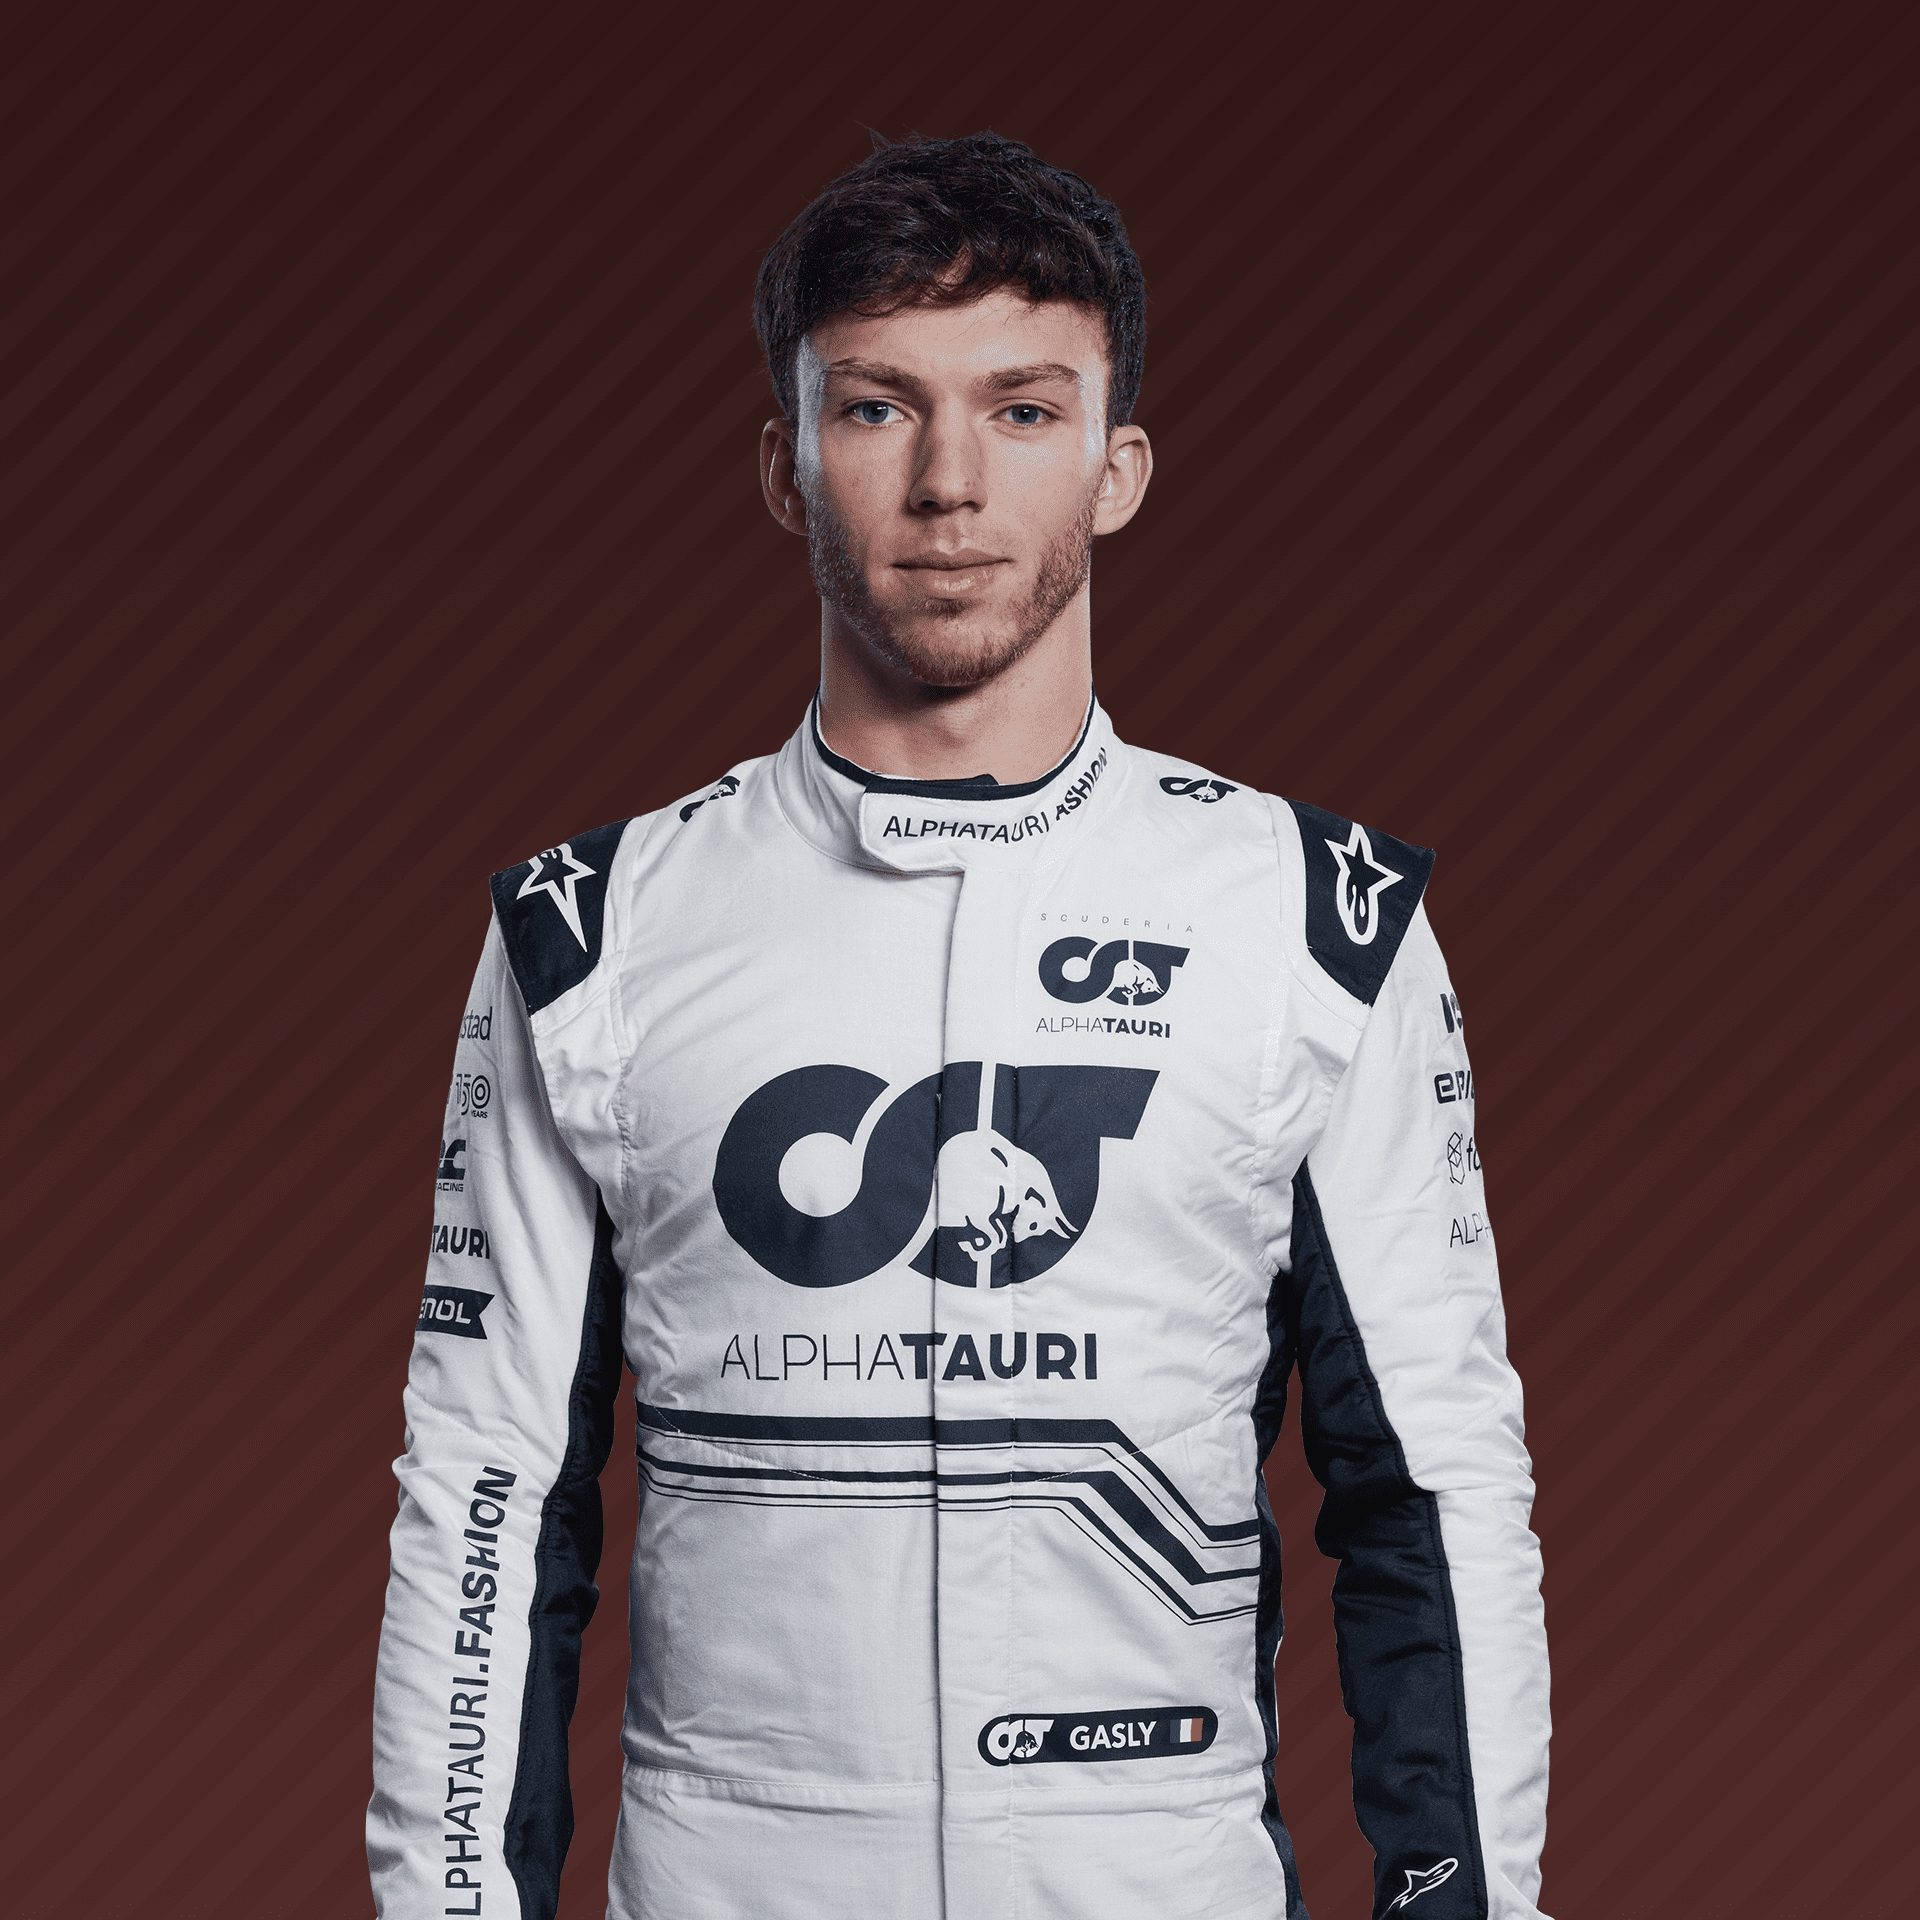 Pierre Gasly - A Determined Force in Formula One Wallpaper